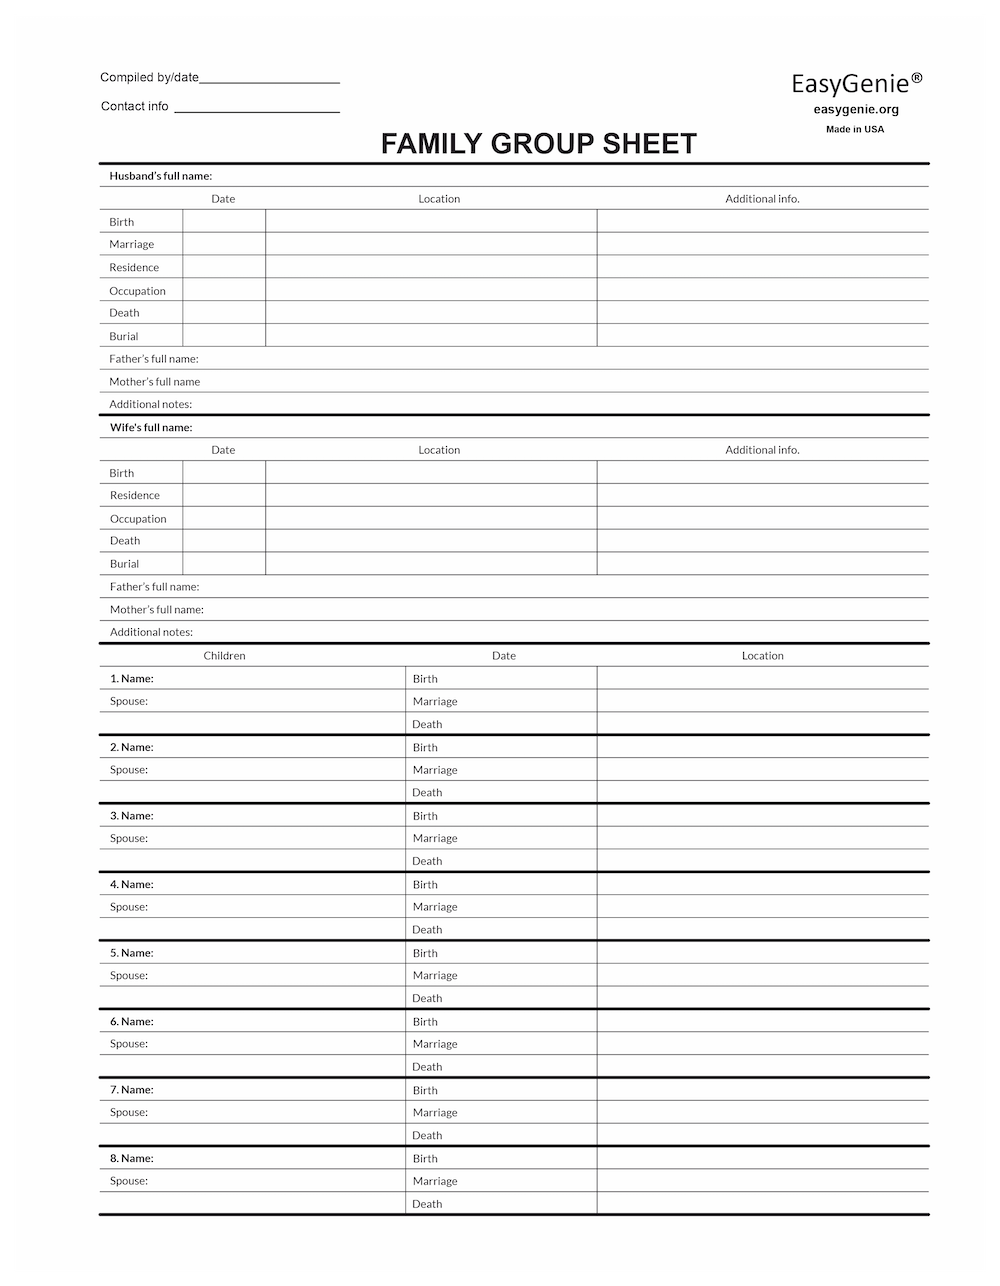 EasyGenie Blank Two Sided Family Group Sheets for Genealogy (40 sheets